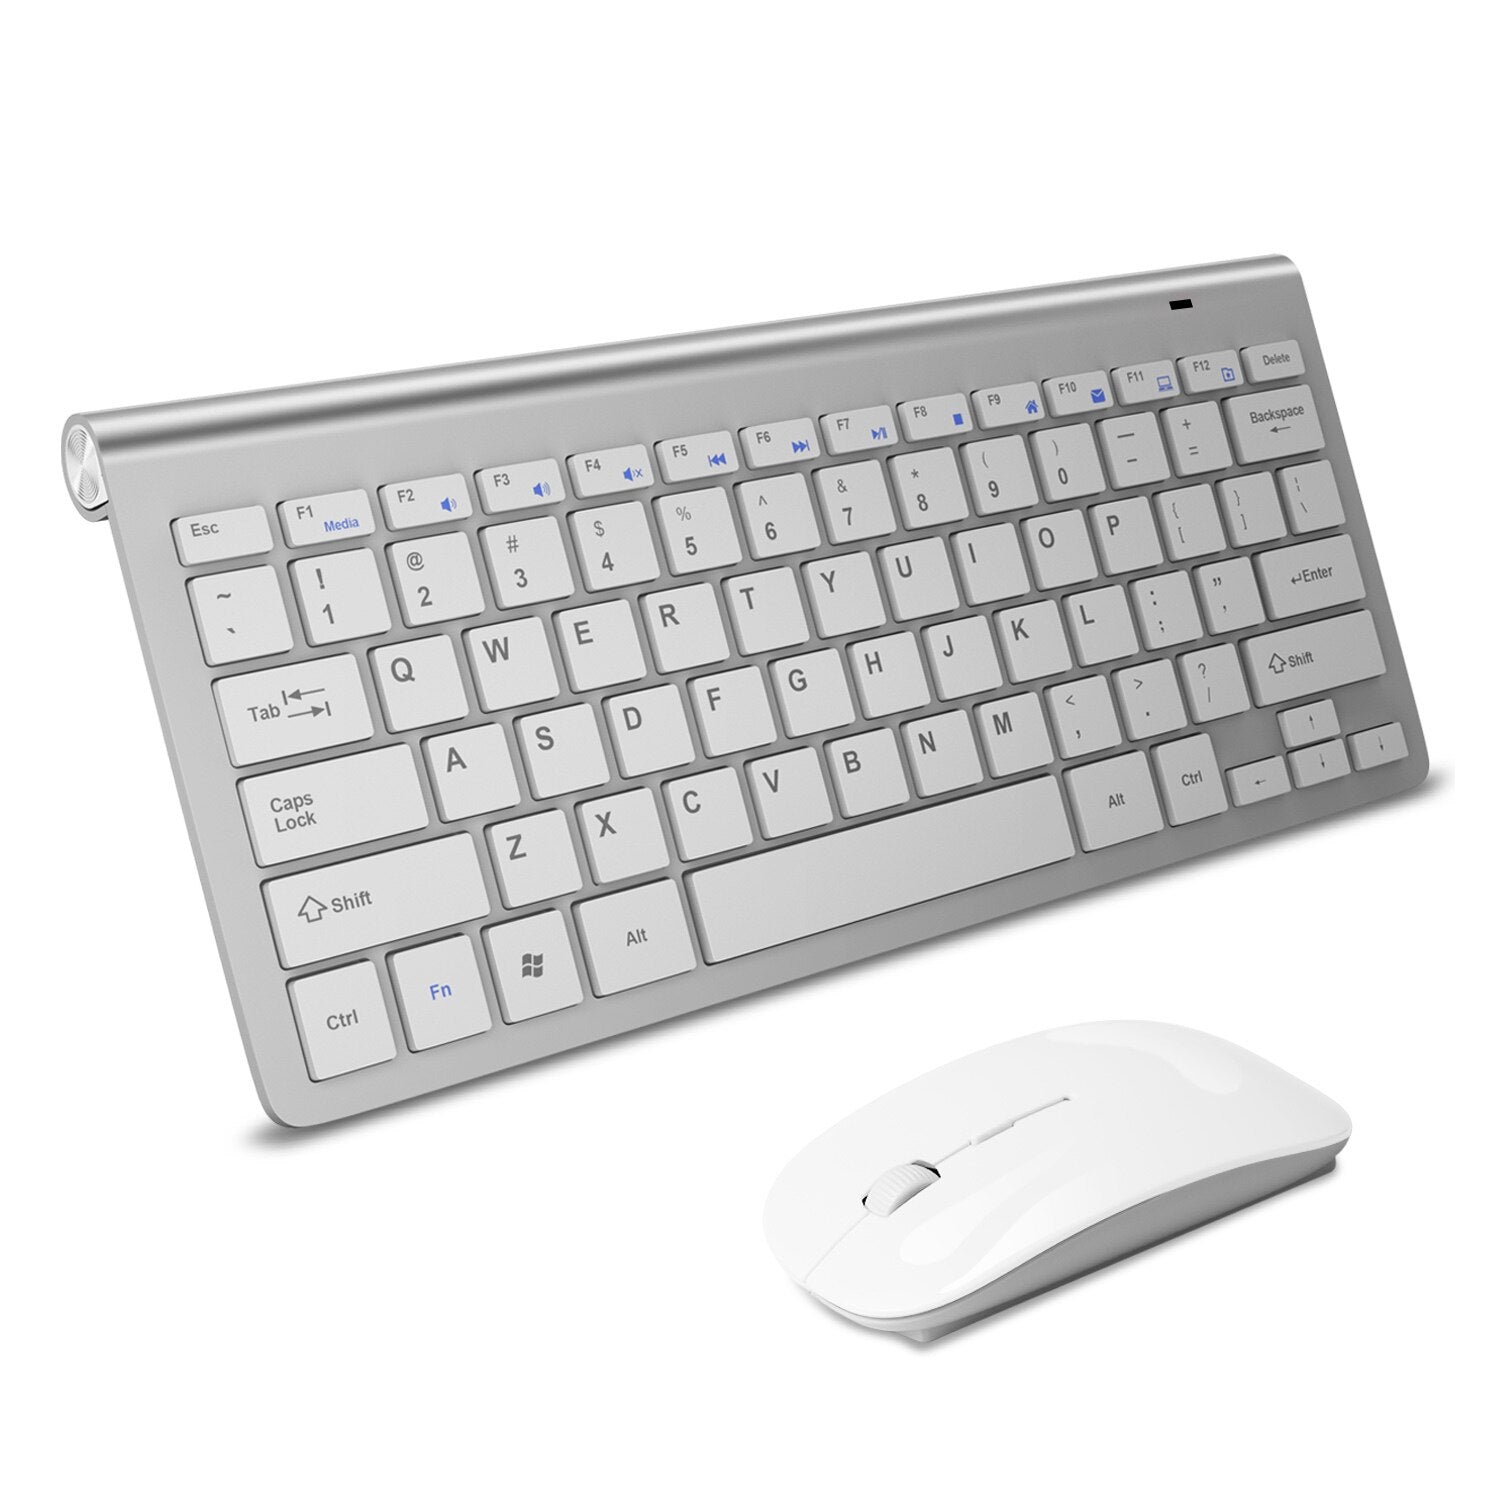 Wireless Keyboard and Mouse 2.4G USB Mini keyboard Mouse Combos Noiseless Ergonomic Keyboard with mouse set For PC Laptop TV.